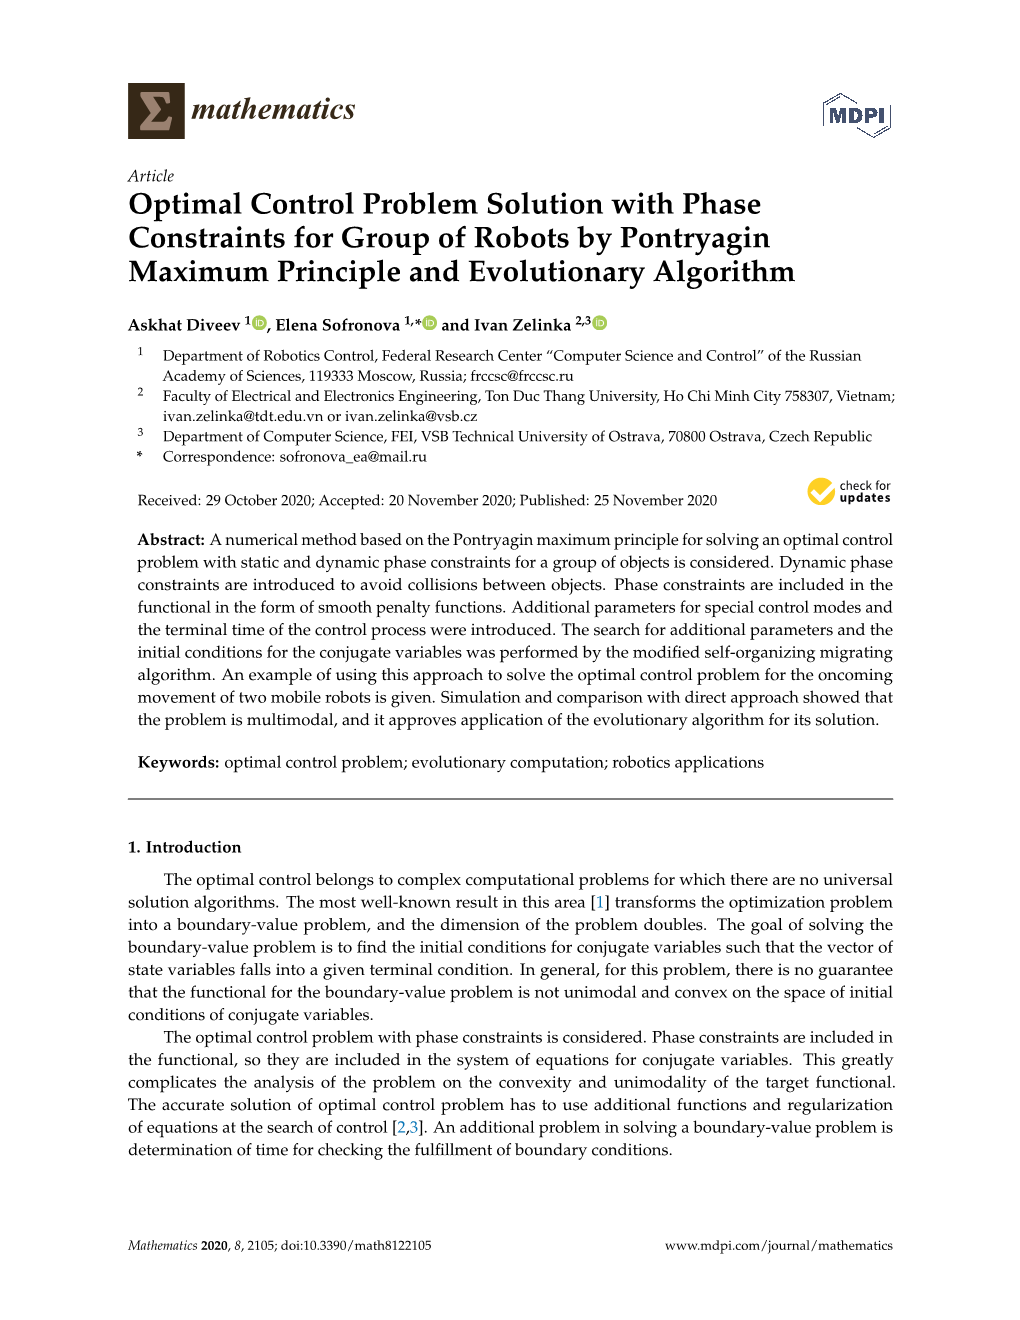 Optimal Control Problem Solution with Phase Constraints for Group of Robots by Pontryagin Maximum Principle and Evolutionary Algorithm